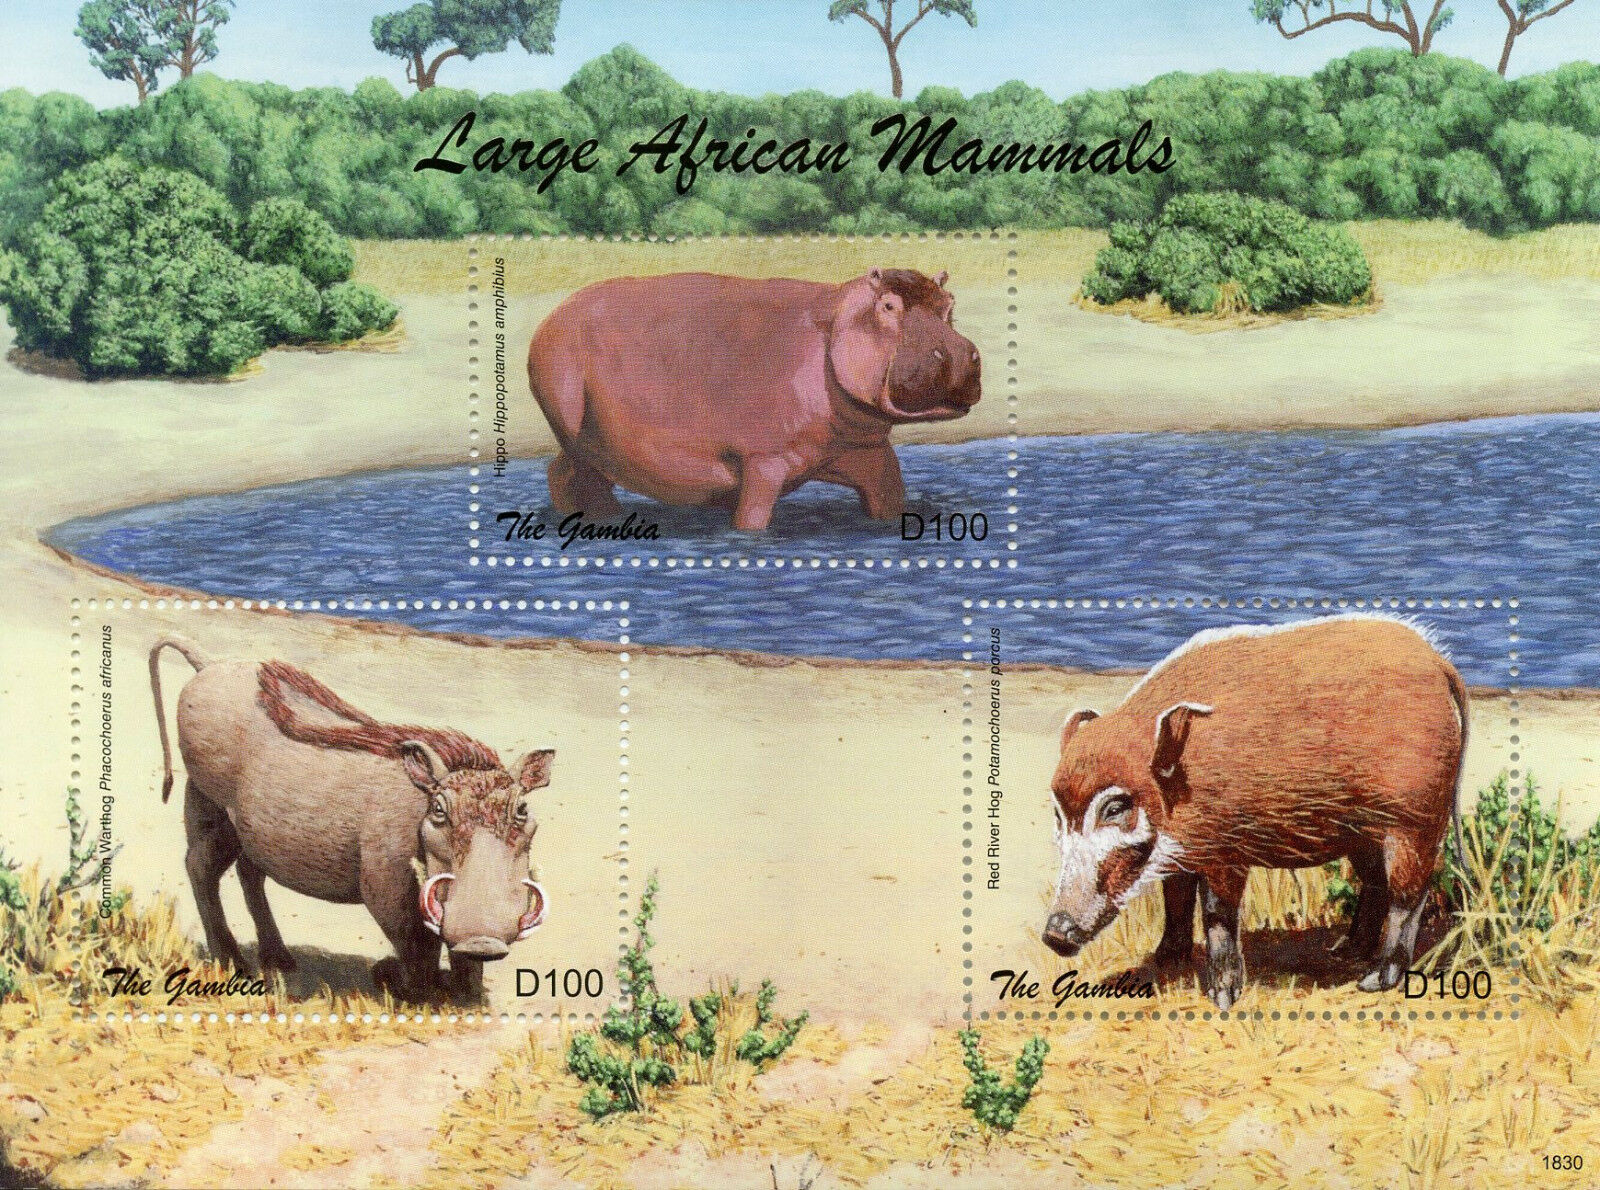 Gambia Wild Animals Stamps 2018 MNH Large African Mammals Hippos Warthogs 3v M/S